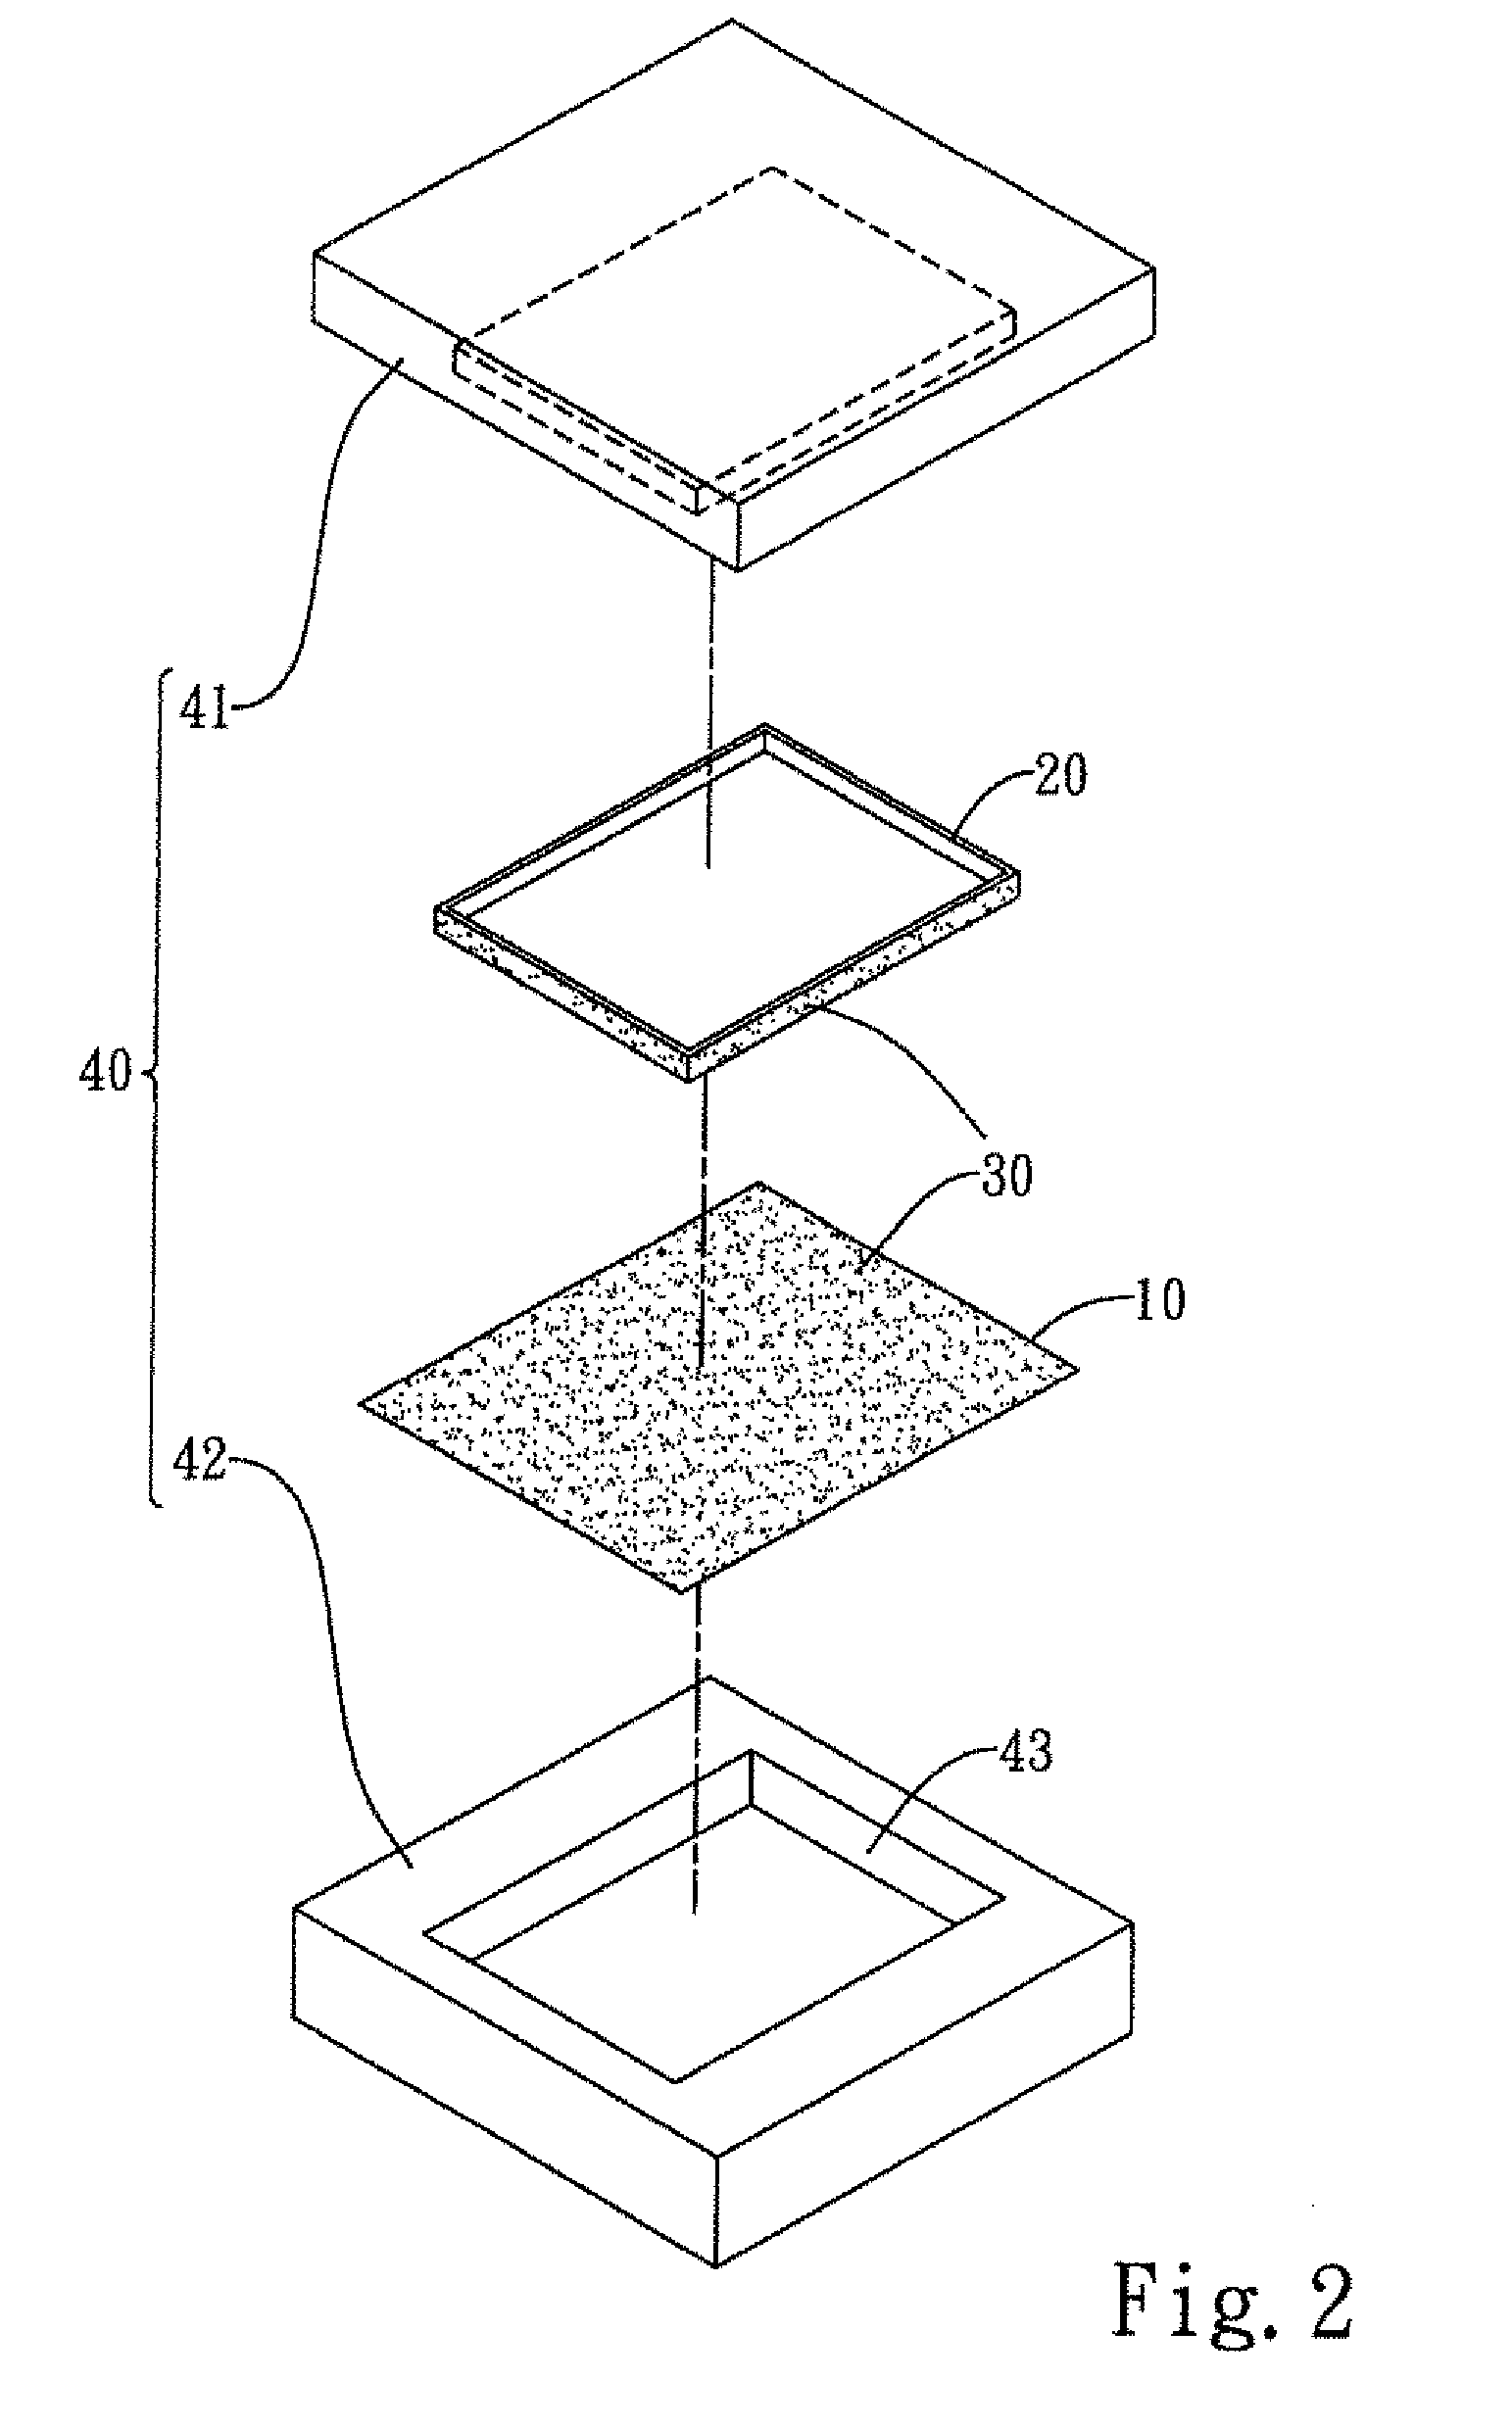 Method of Producing Outer Covering on a Housing of Product